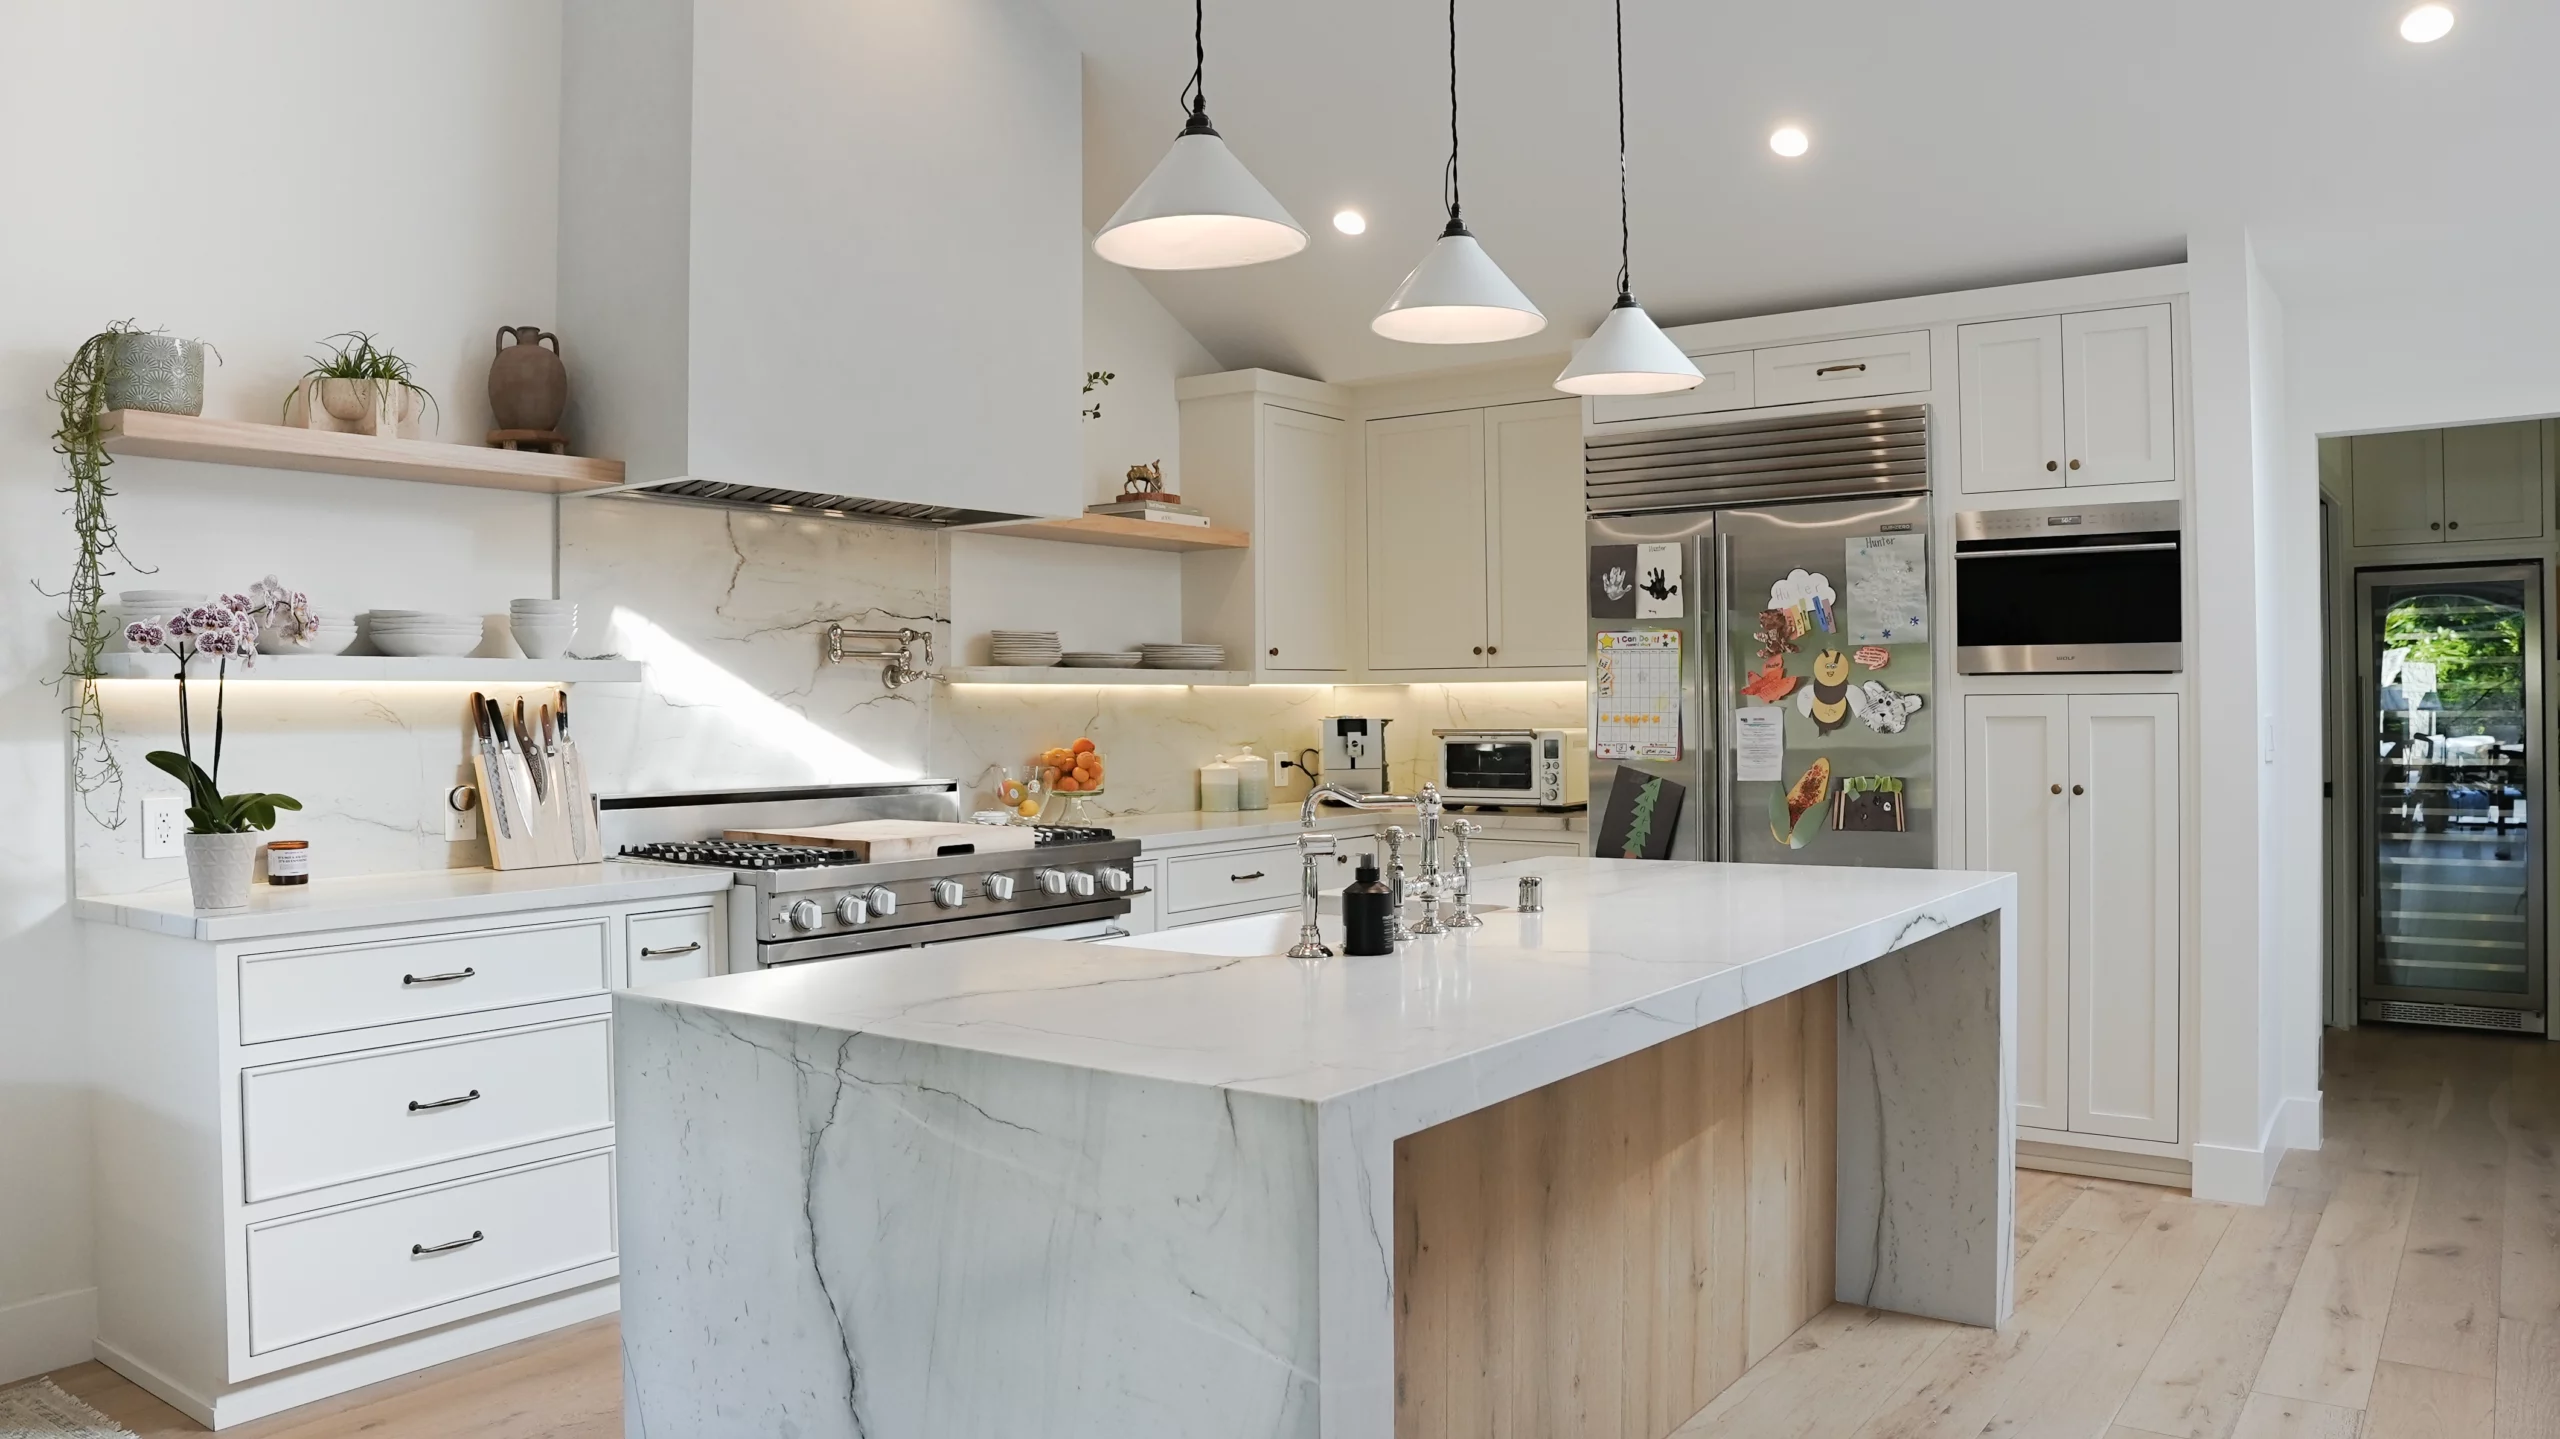 Modern kitchen with white cabinets and marble countertops.